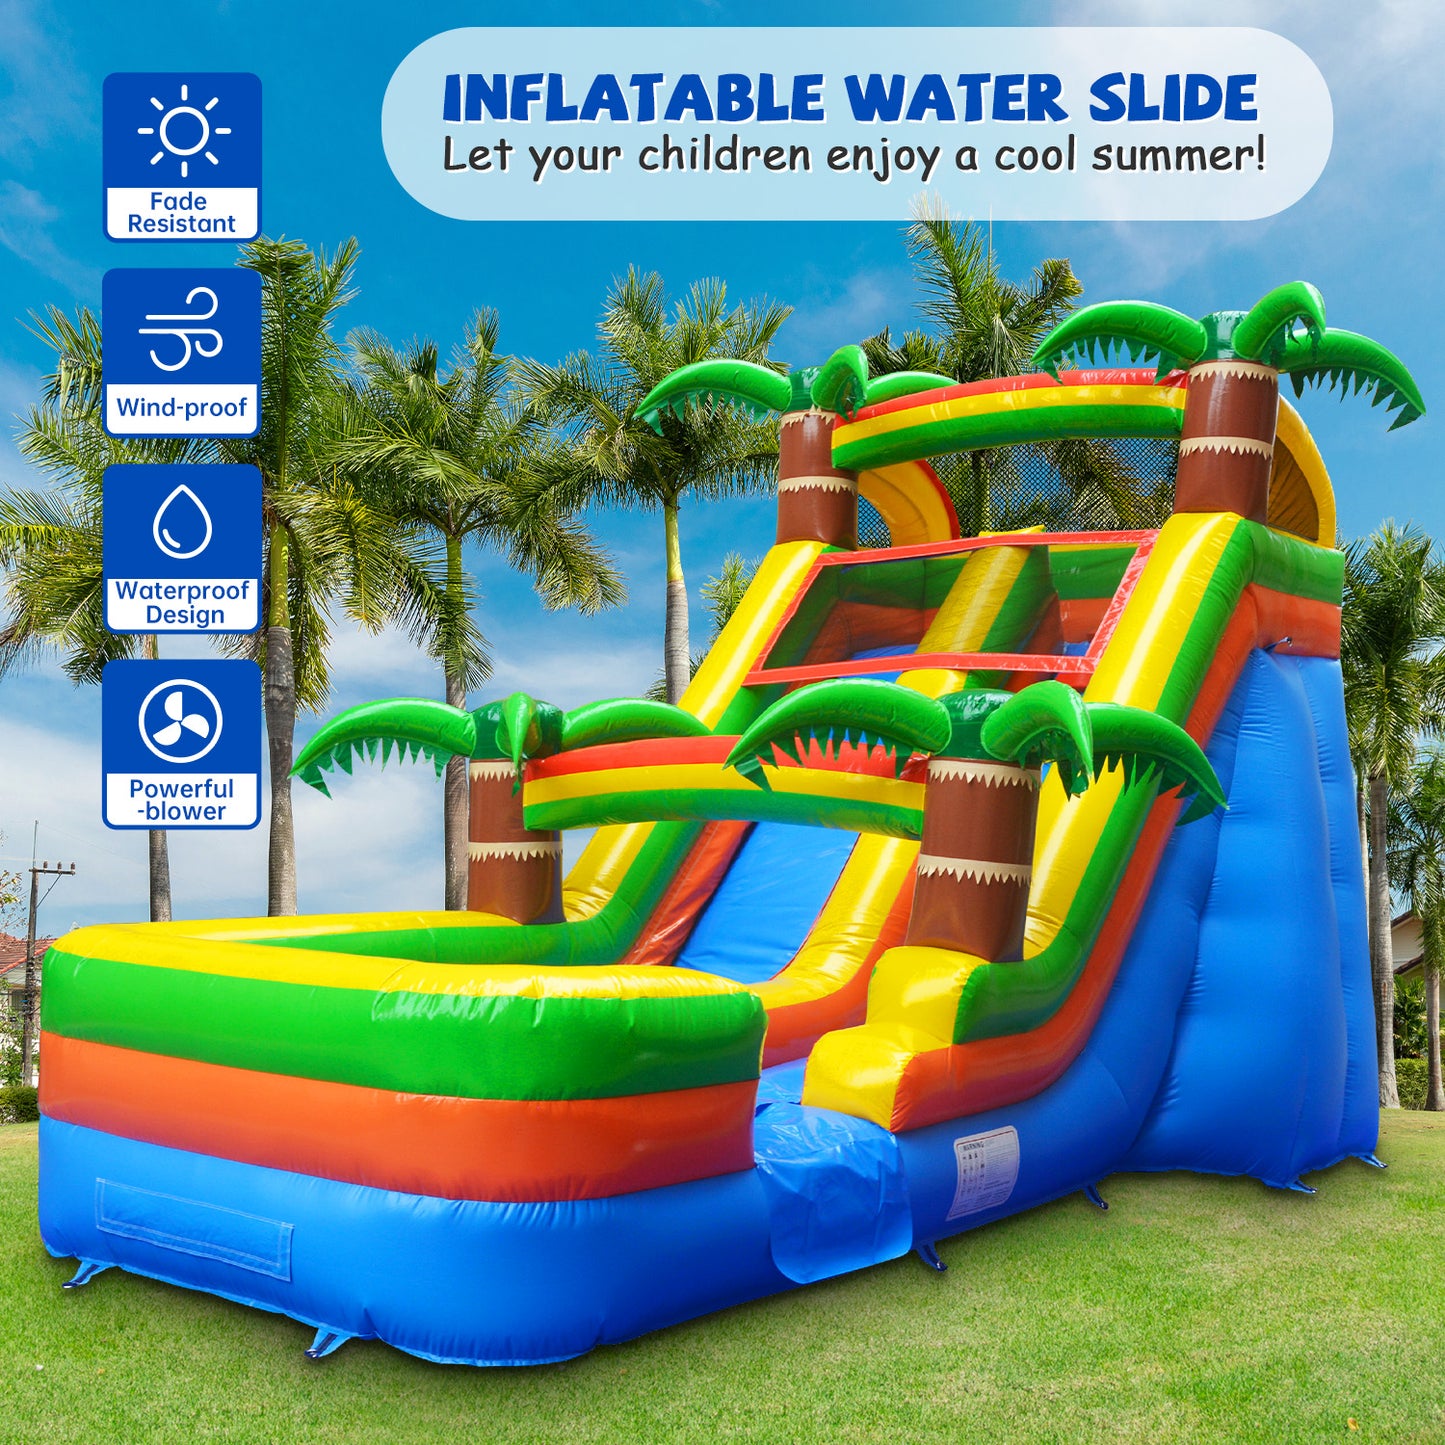 21' x 12' x 14' Wet/Dry Tropical Oasis Commercial Inflatable Water Slide #11186